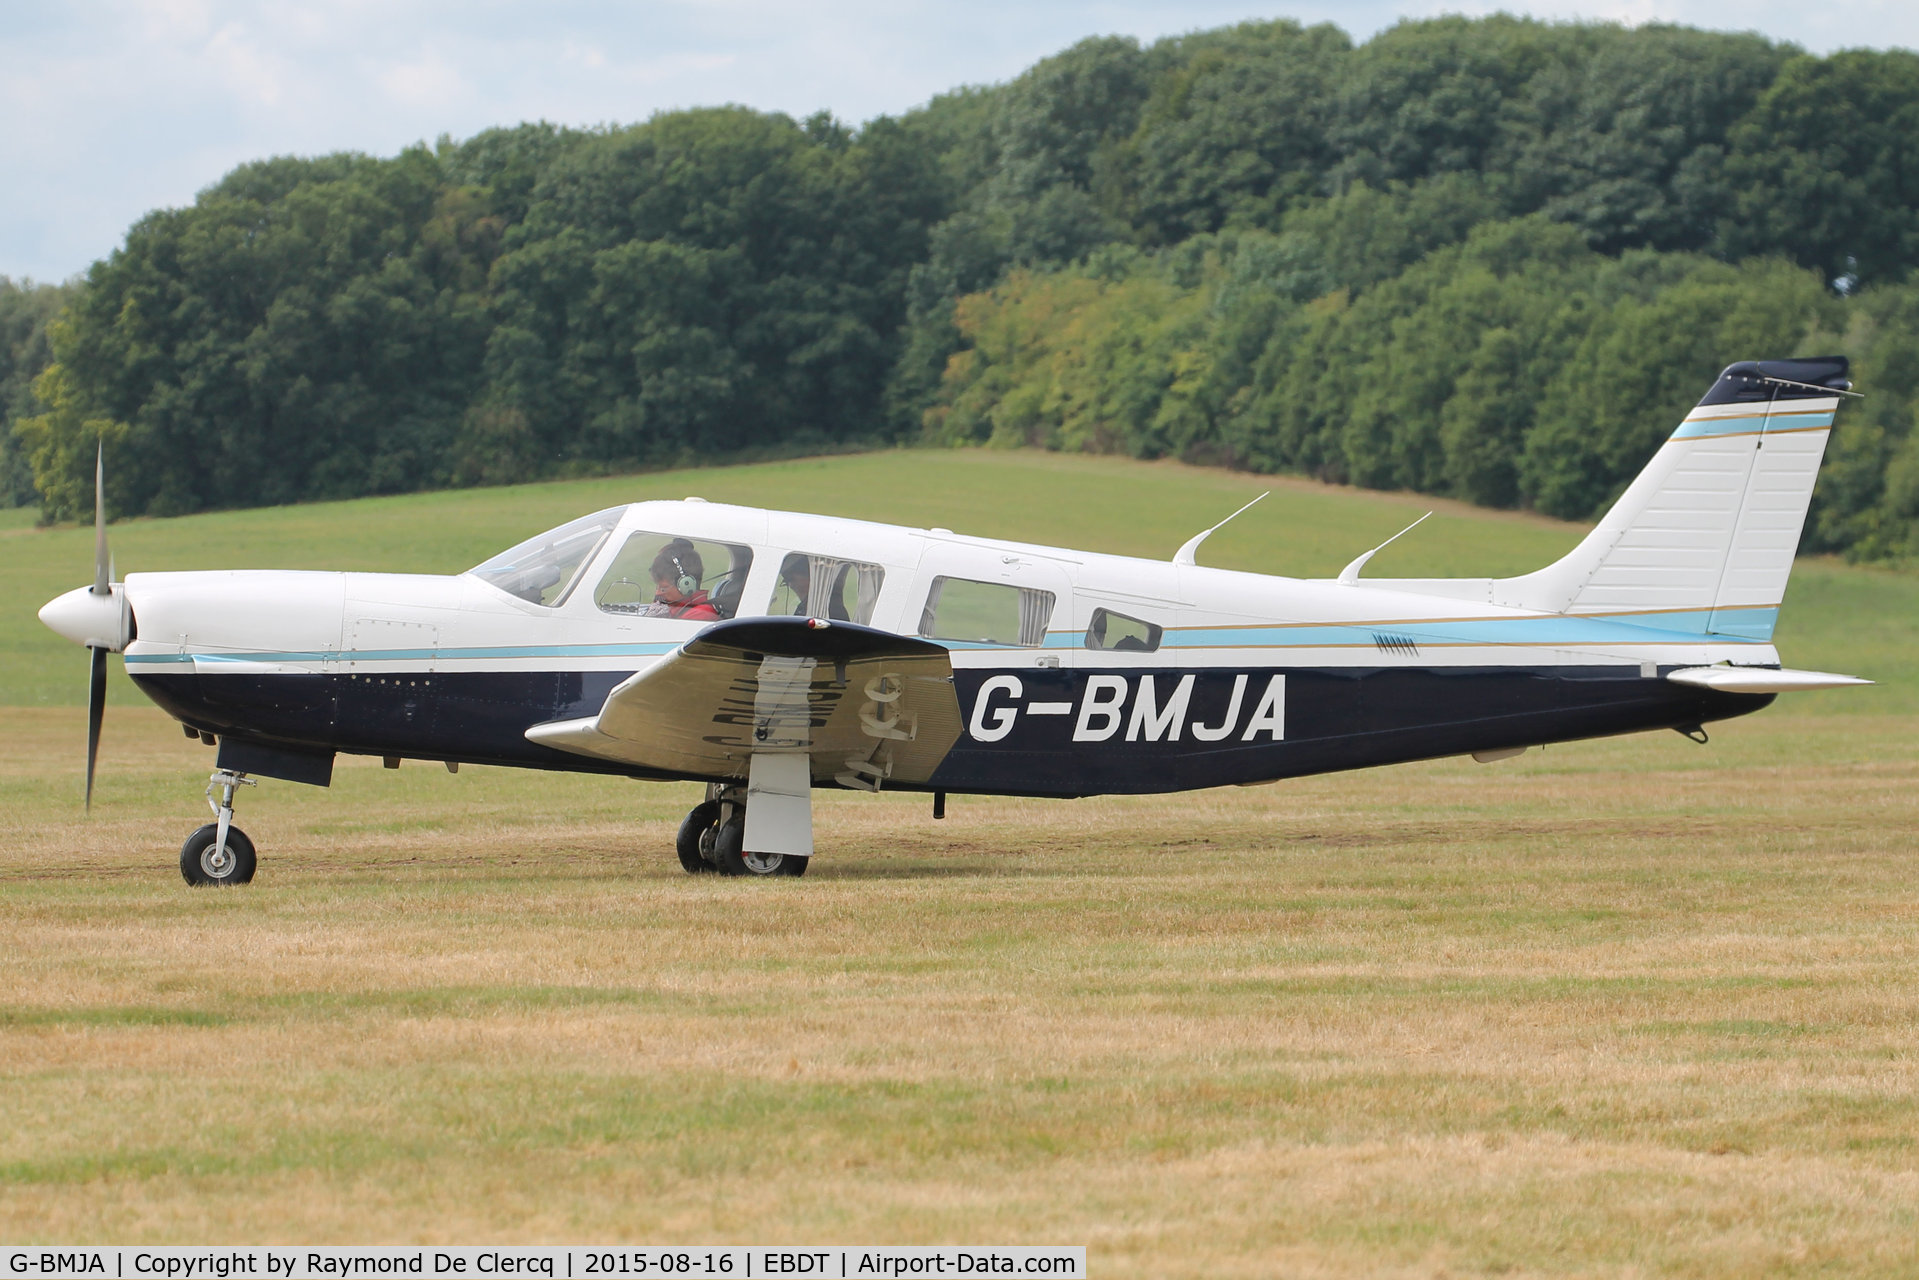 G-BMJA, 1981 Piper PA-32R-301 Saratoga SP C/N 32R-8113019, Arriving at the Oldtimer Fly-in Schaffen 2015.